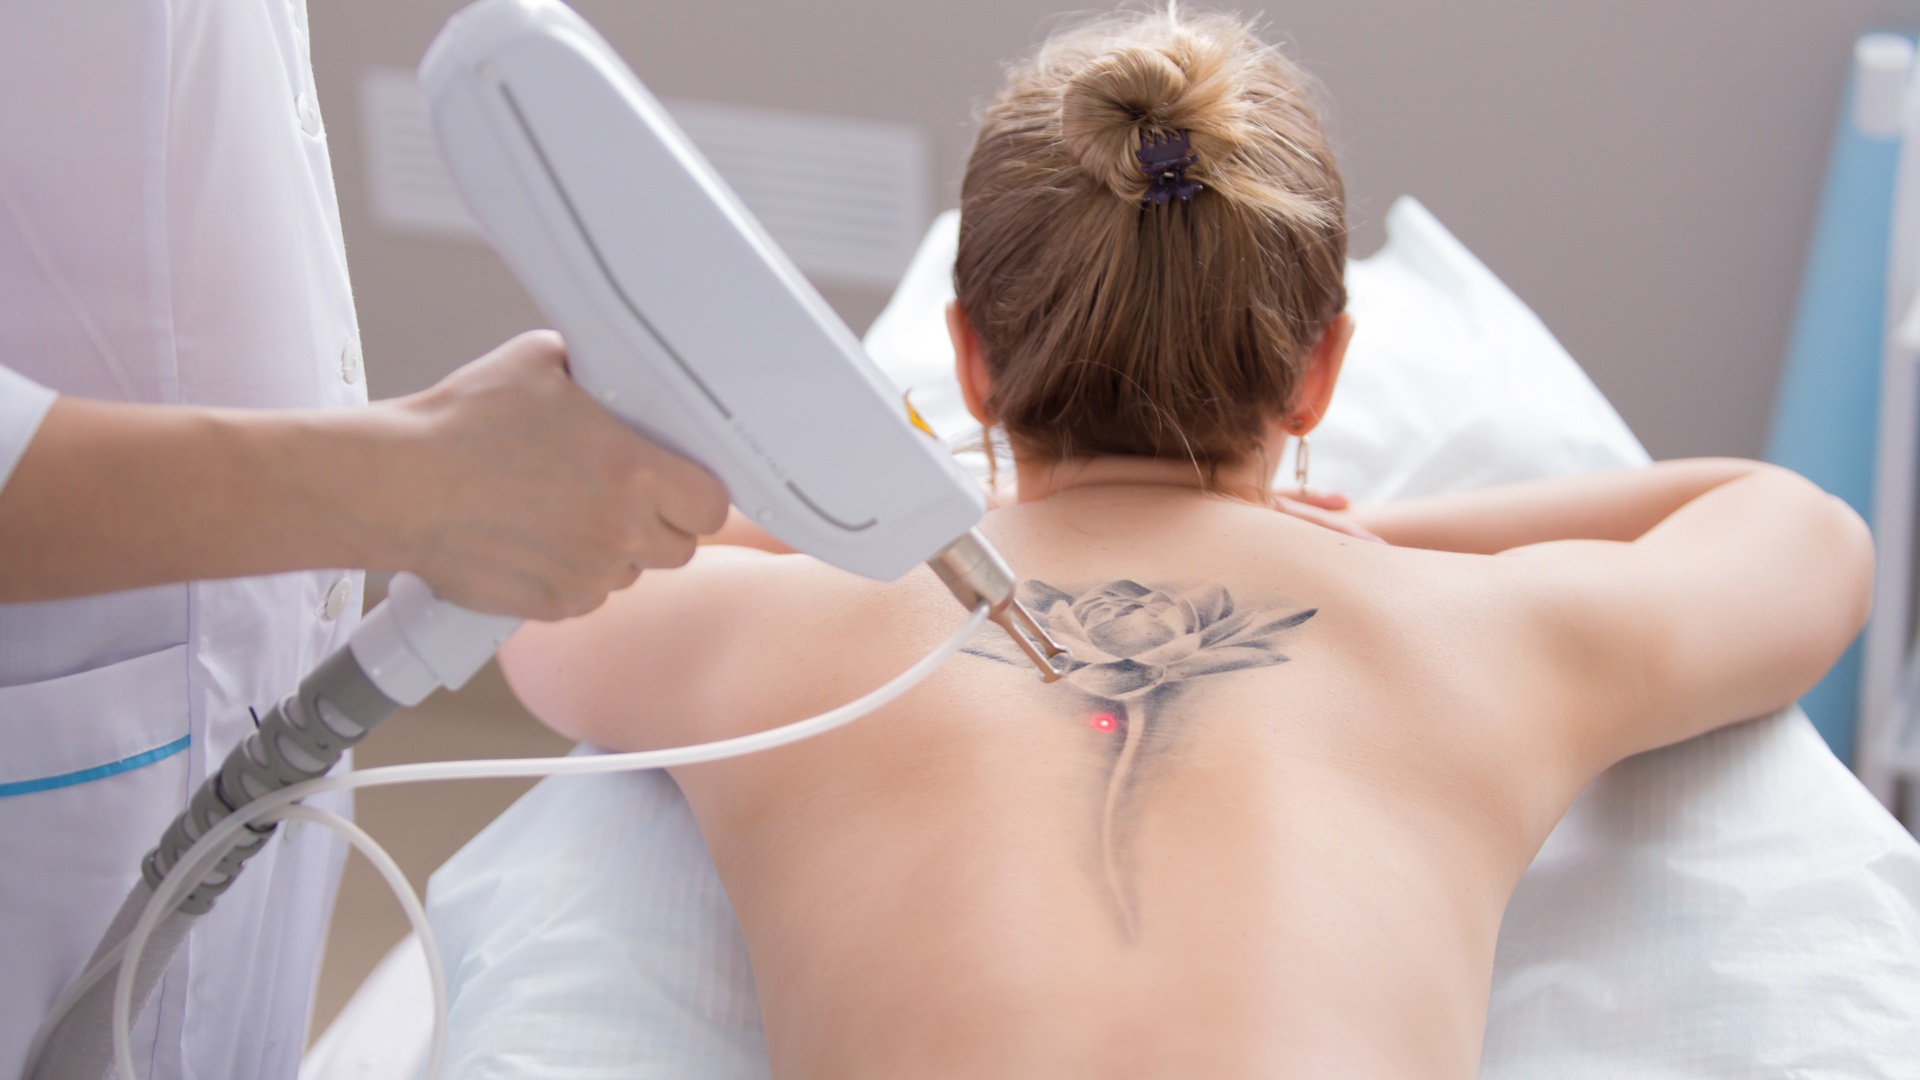 Victory Cincinnati has the LATEST tattoo removal laser Super effective and  gets rid of LARGE tattoos faster t  Laser tattoo removal Tattoo removal Laser  tattoo